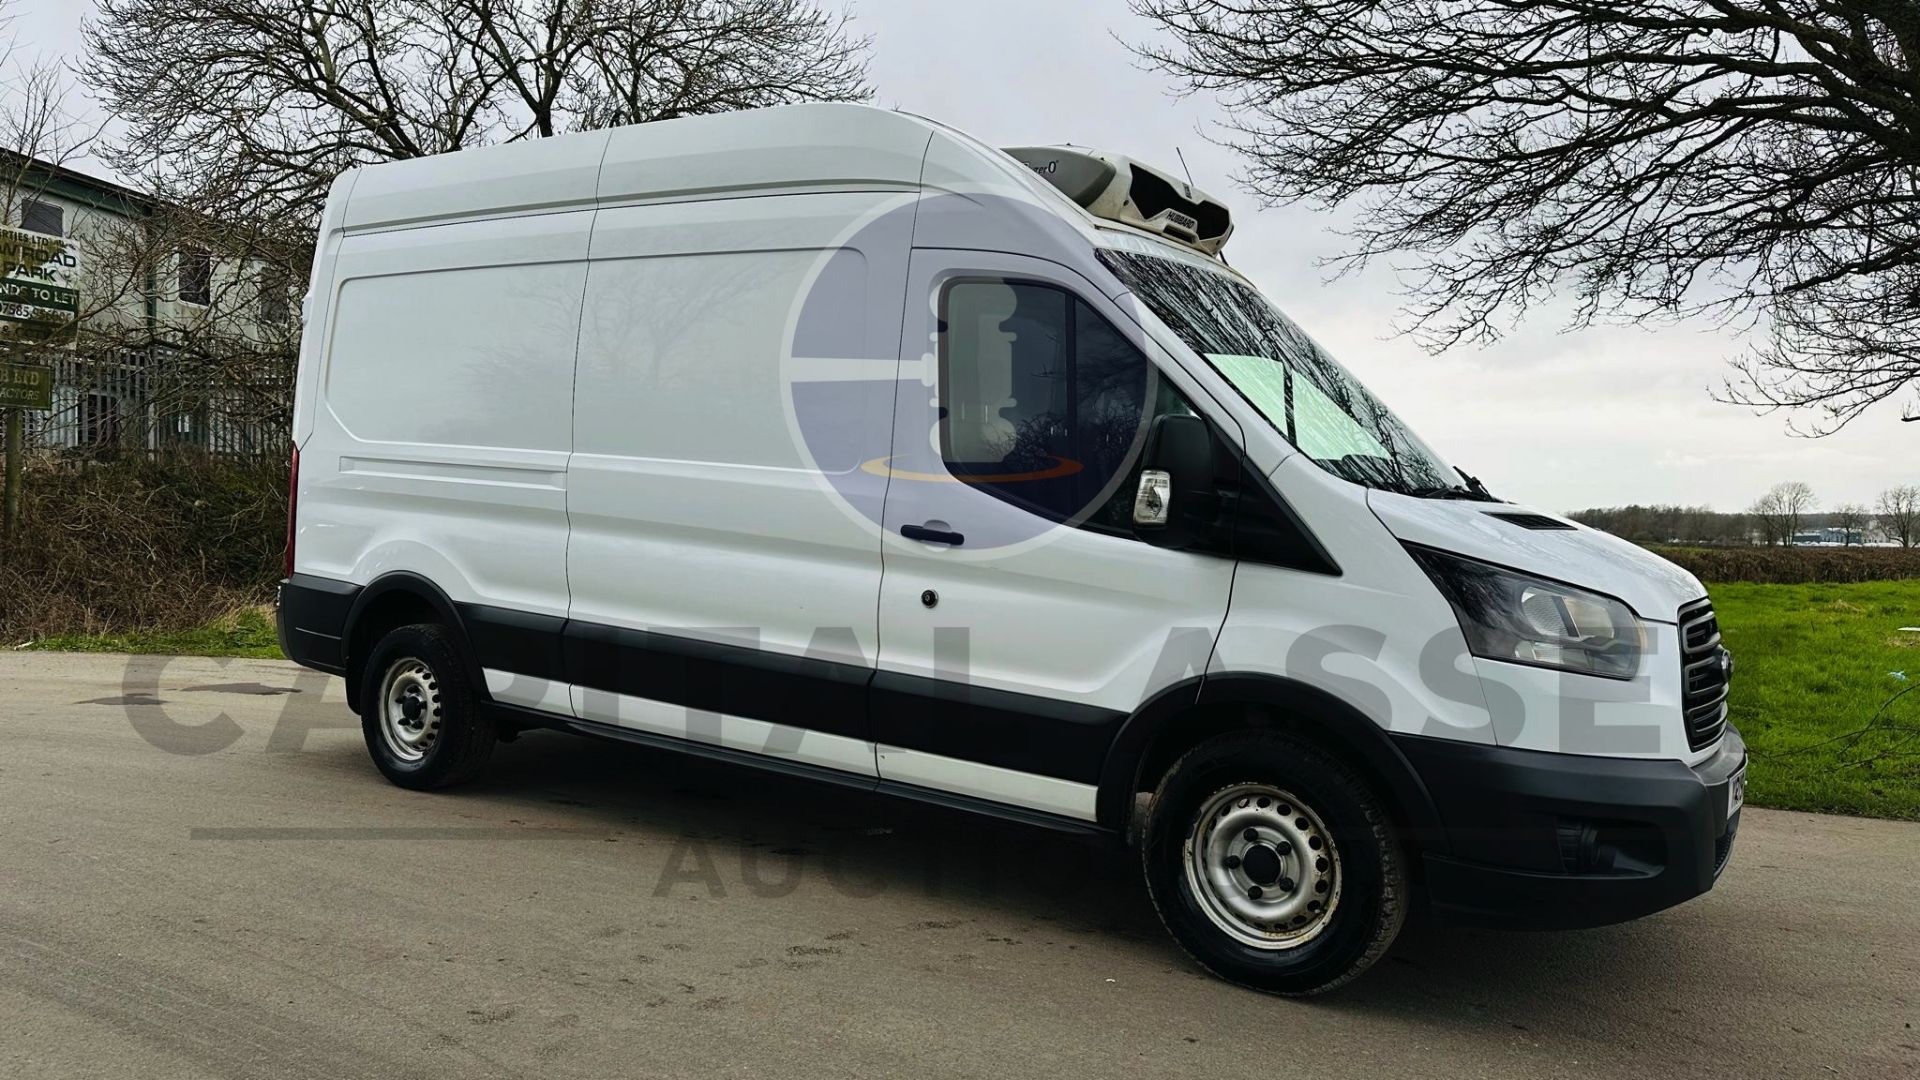 (On Sale) FORD TRANSIT 130 T350 *LWB - REFRIGERATED VAN* (2019 - EURO 6) 2.0 TDCI - 6 SPEED *EURO 6* - Image 2 of 39